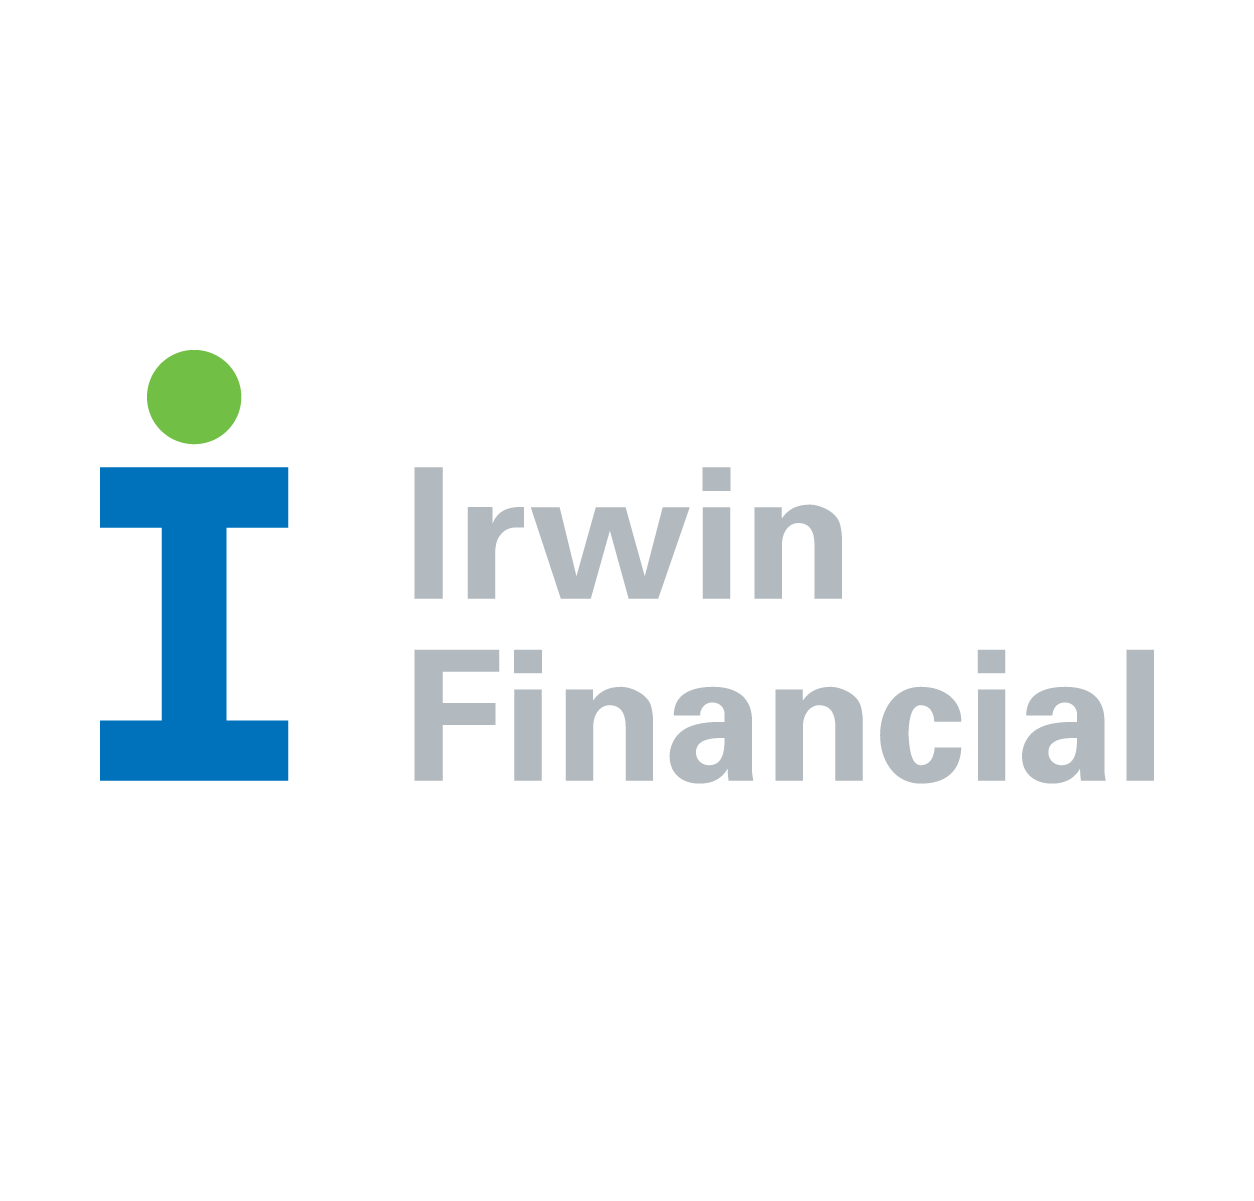 Project Image for Print, Irwin Financial Logo